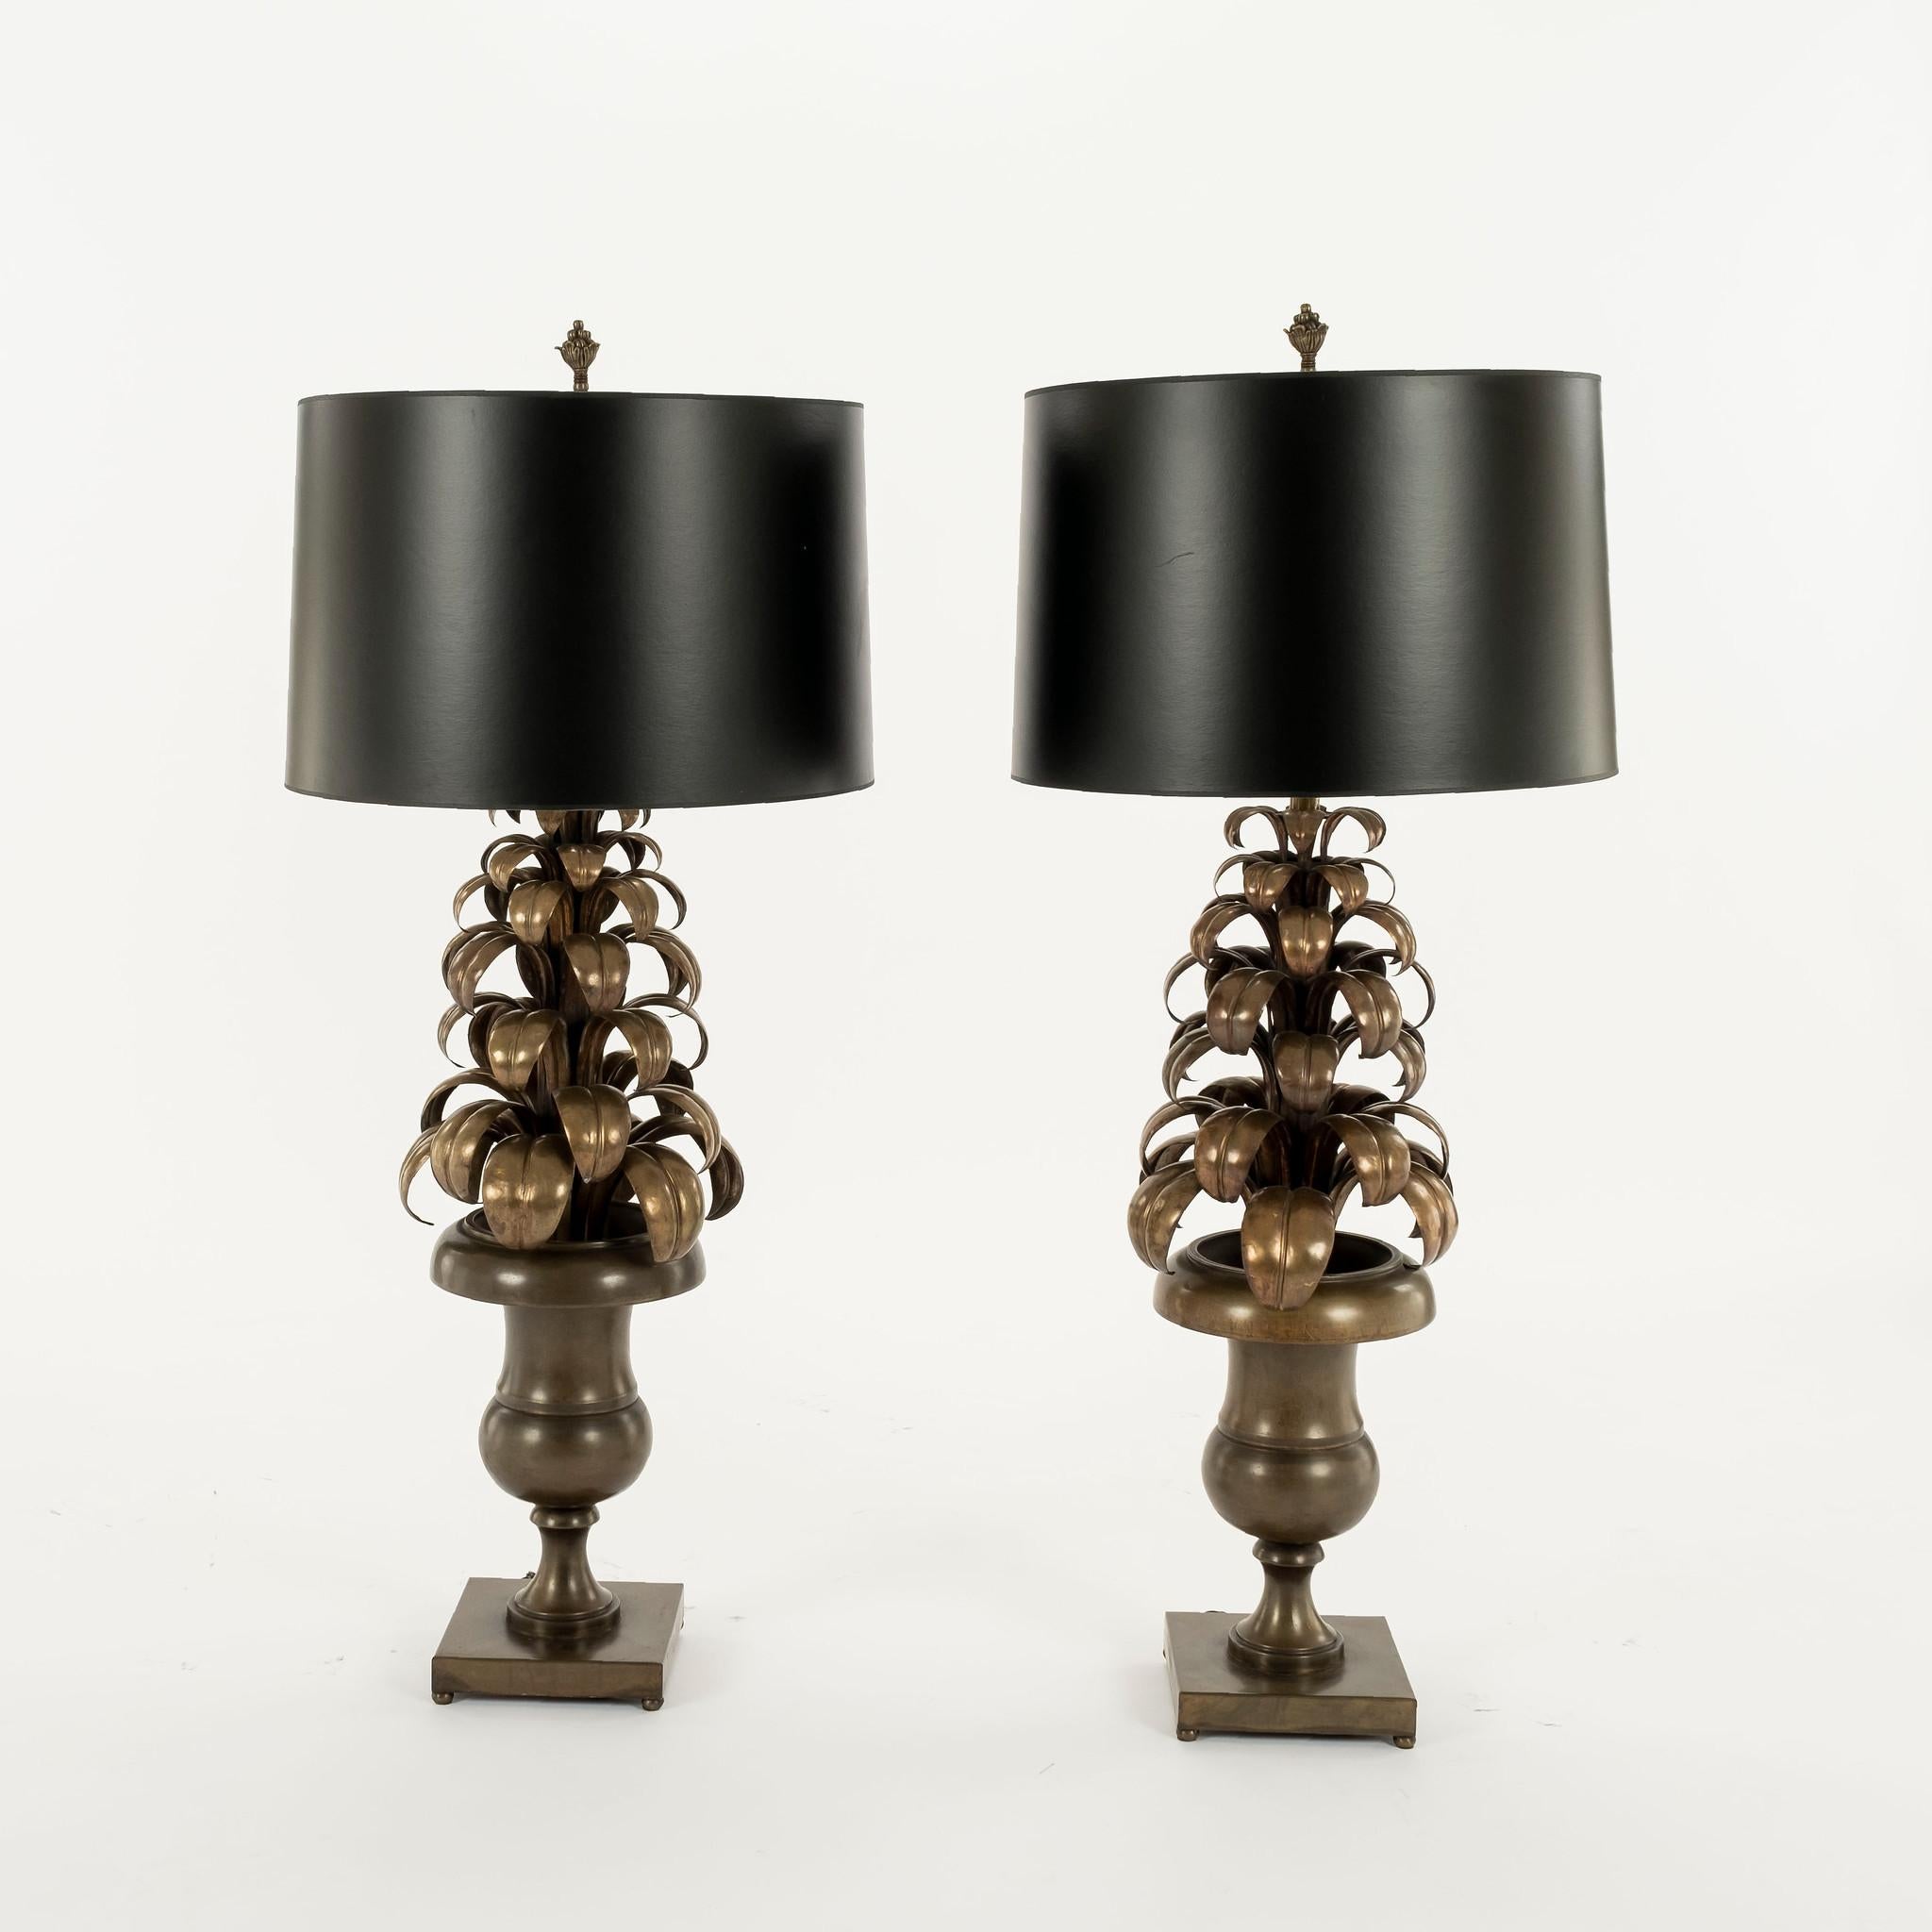 Pair of vintage tole bronze palm lamps with black paper shades.